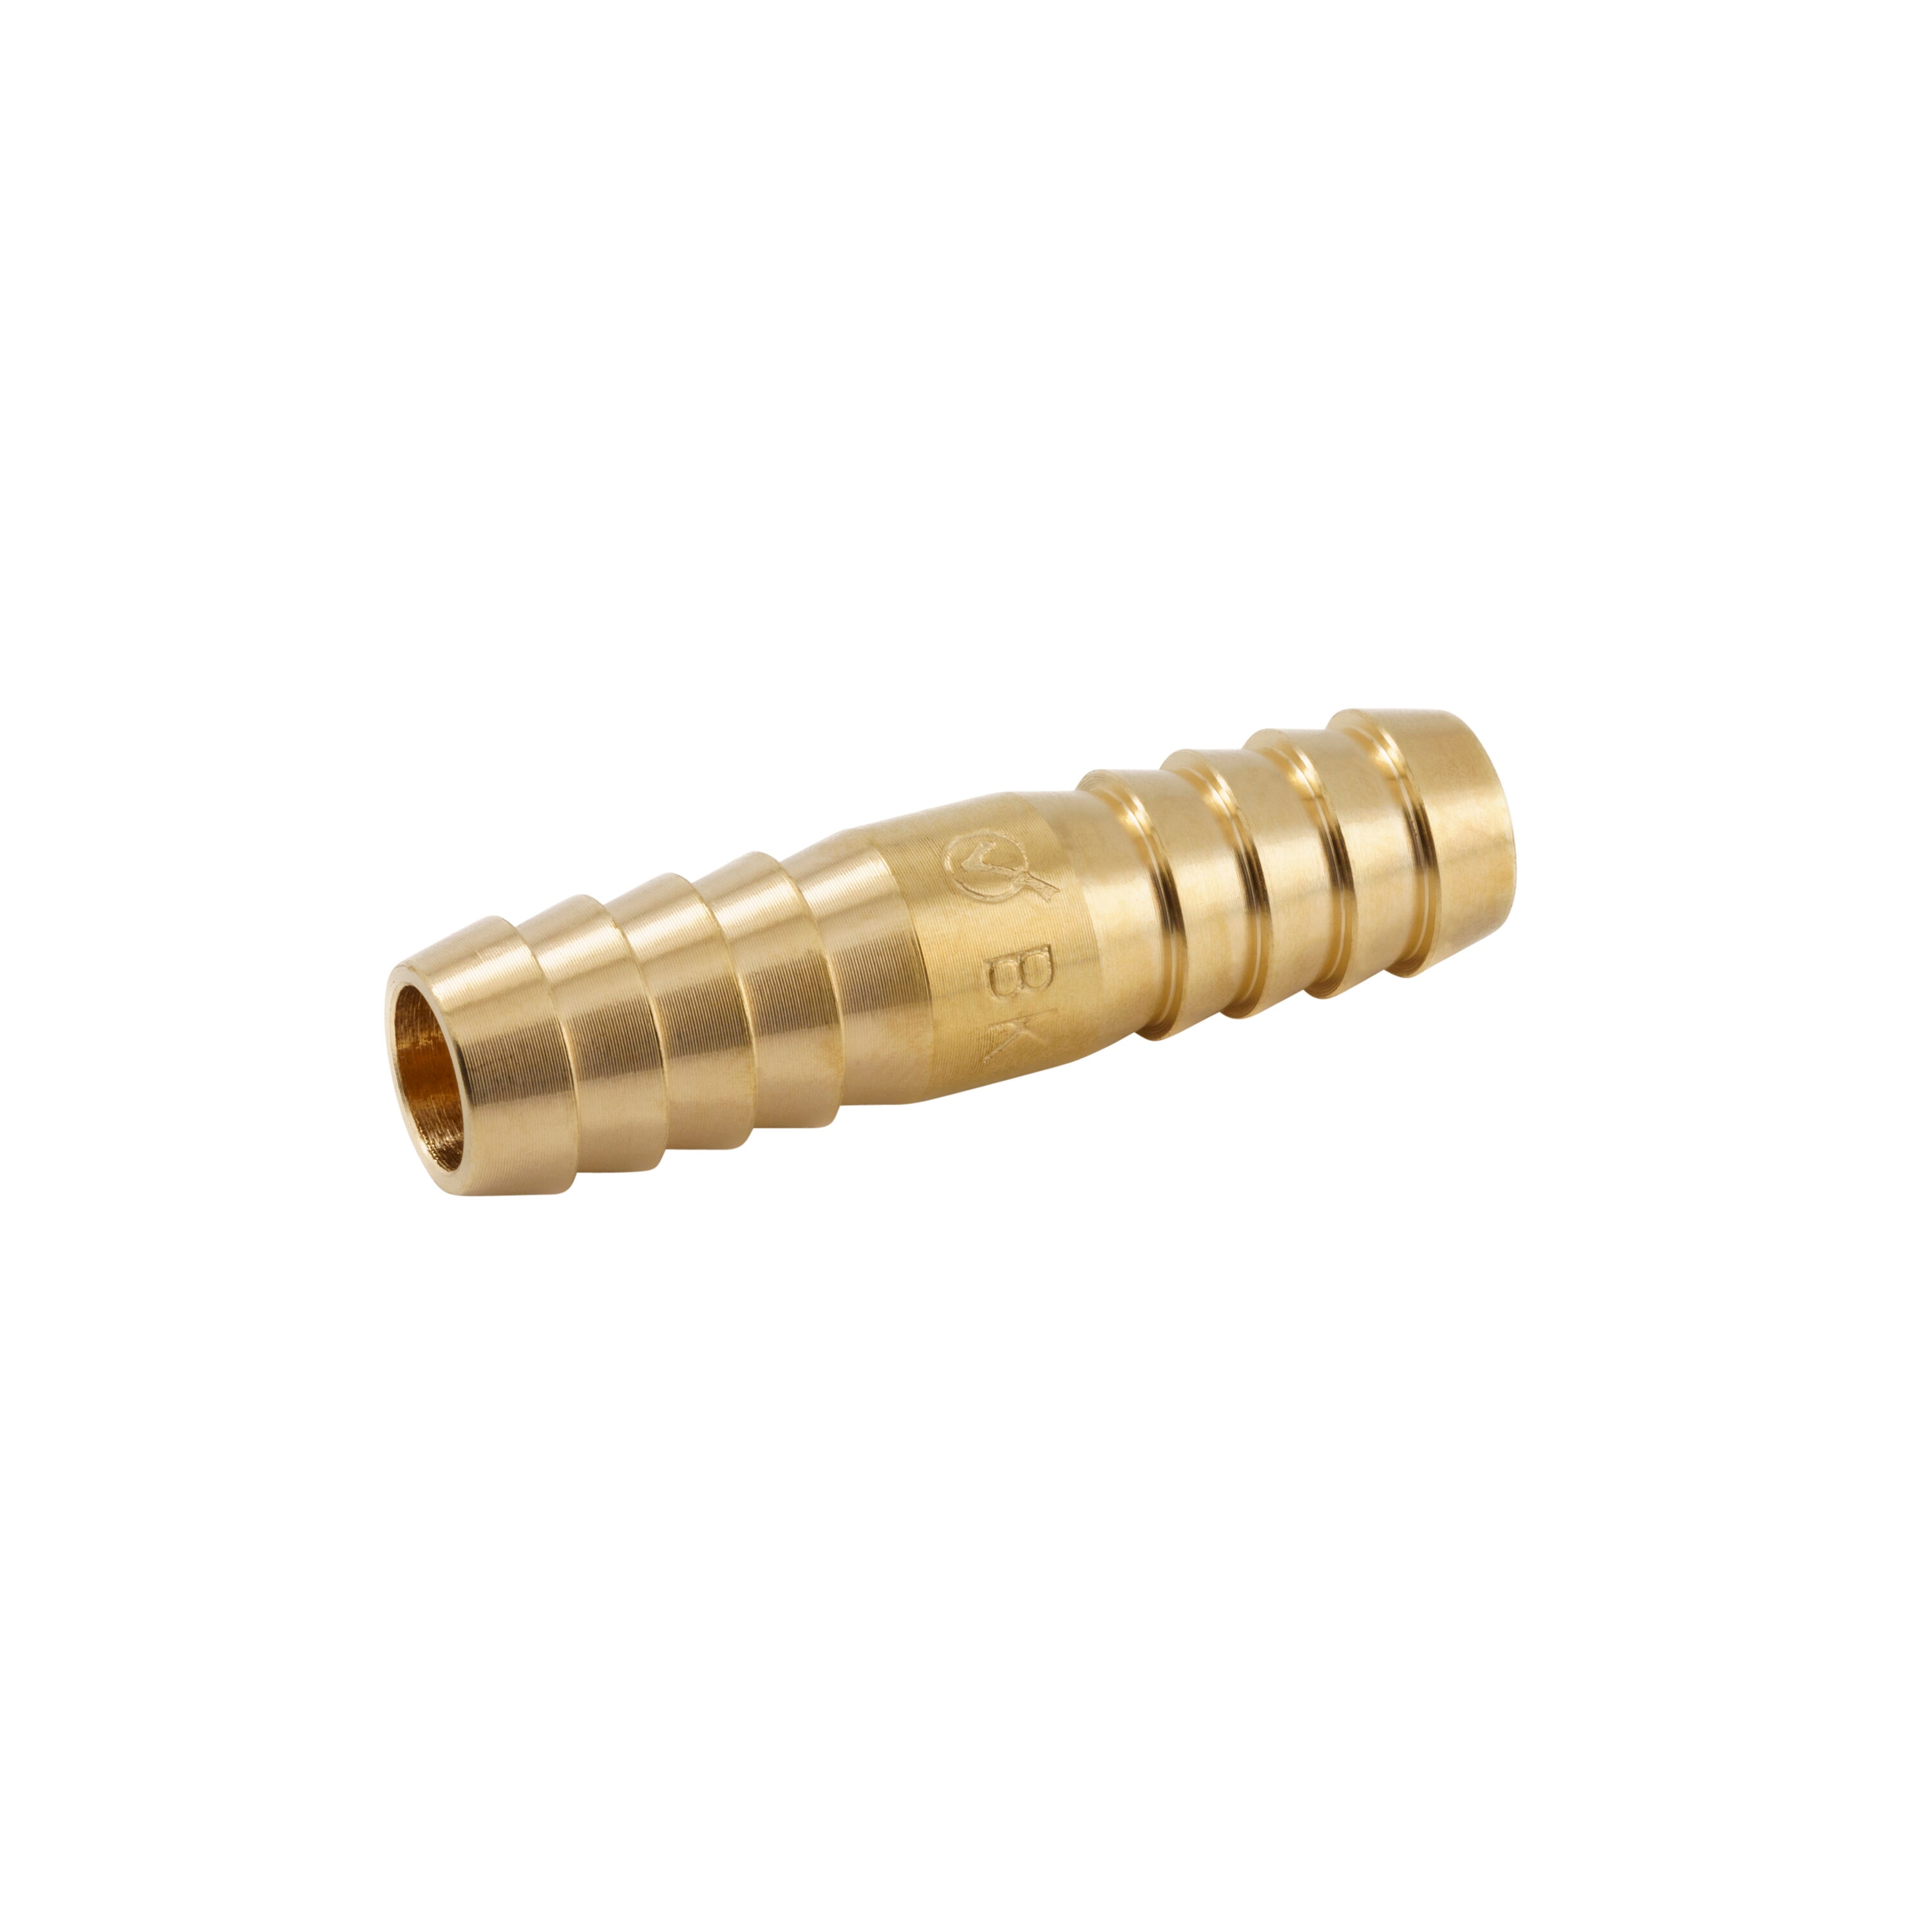 B&K Barbed Splicer Adapter Fitting - Gold - 3/8 x 1/4 Dia - Each